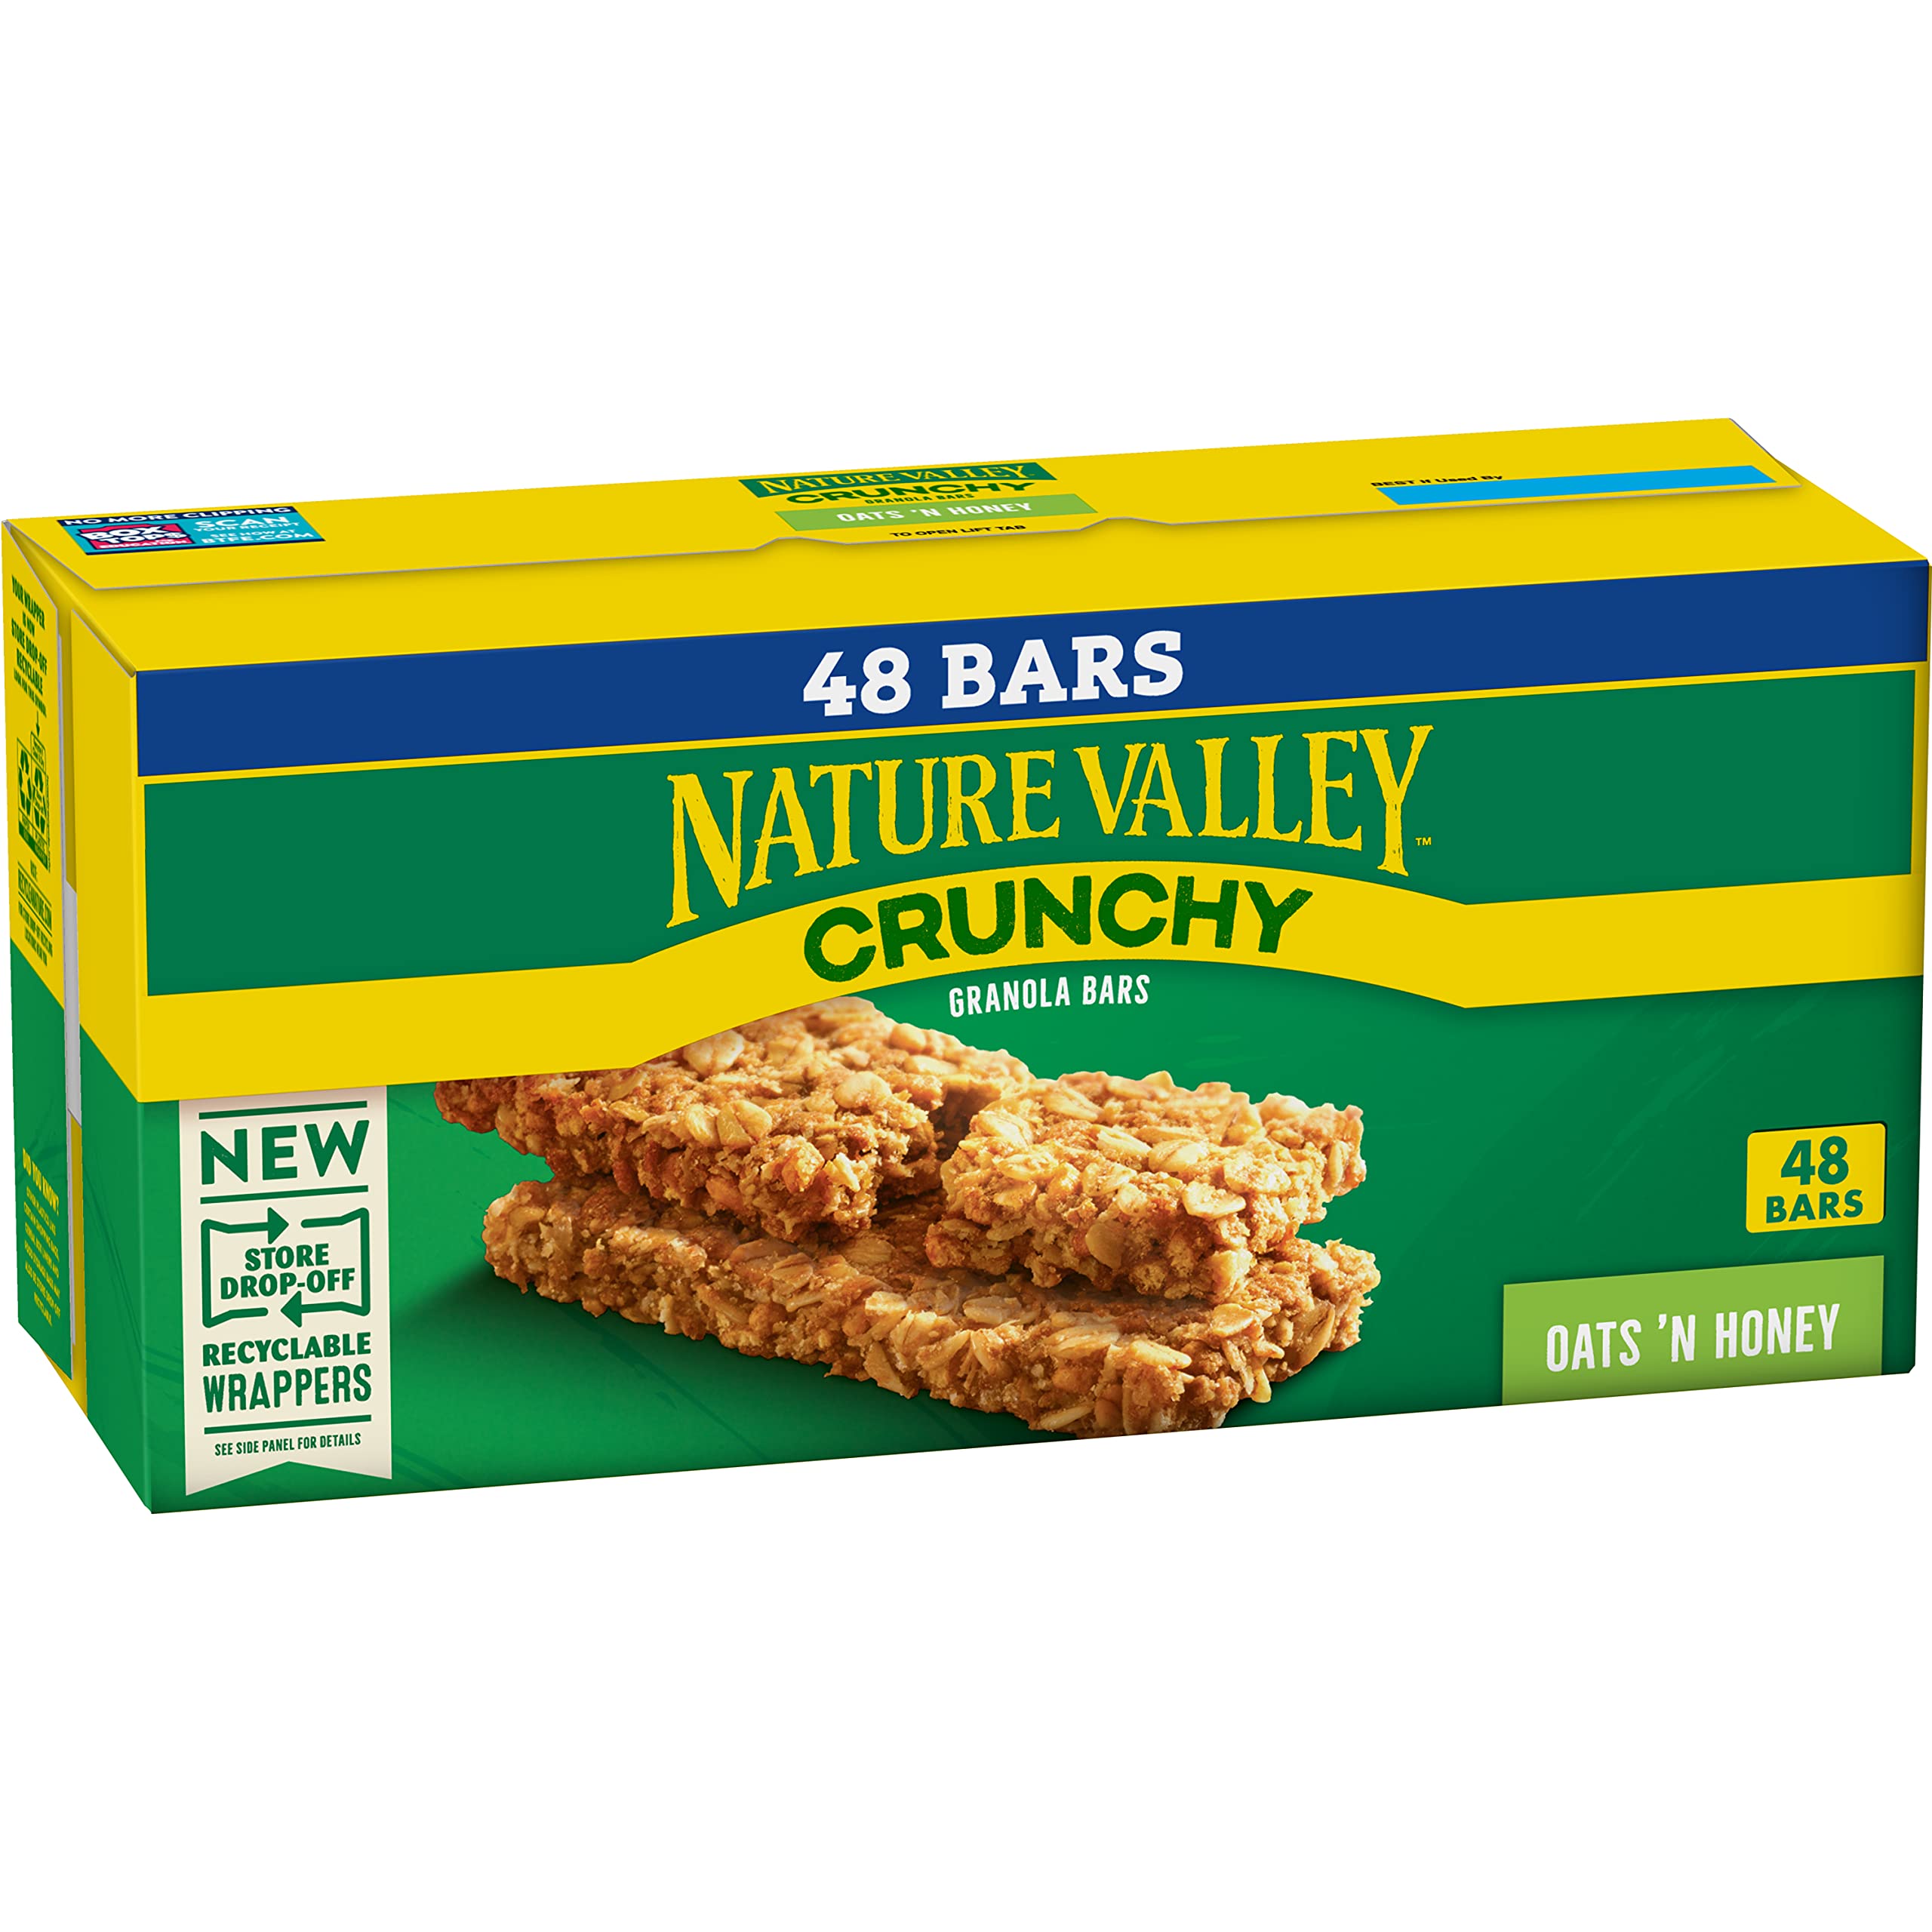 Nature Valley Crunchy Granola Bars Oats 'n Honey, 48 bars $8.37 or $7.53 after 10% S&S at Amazon